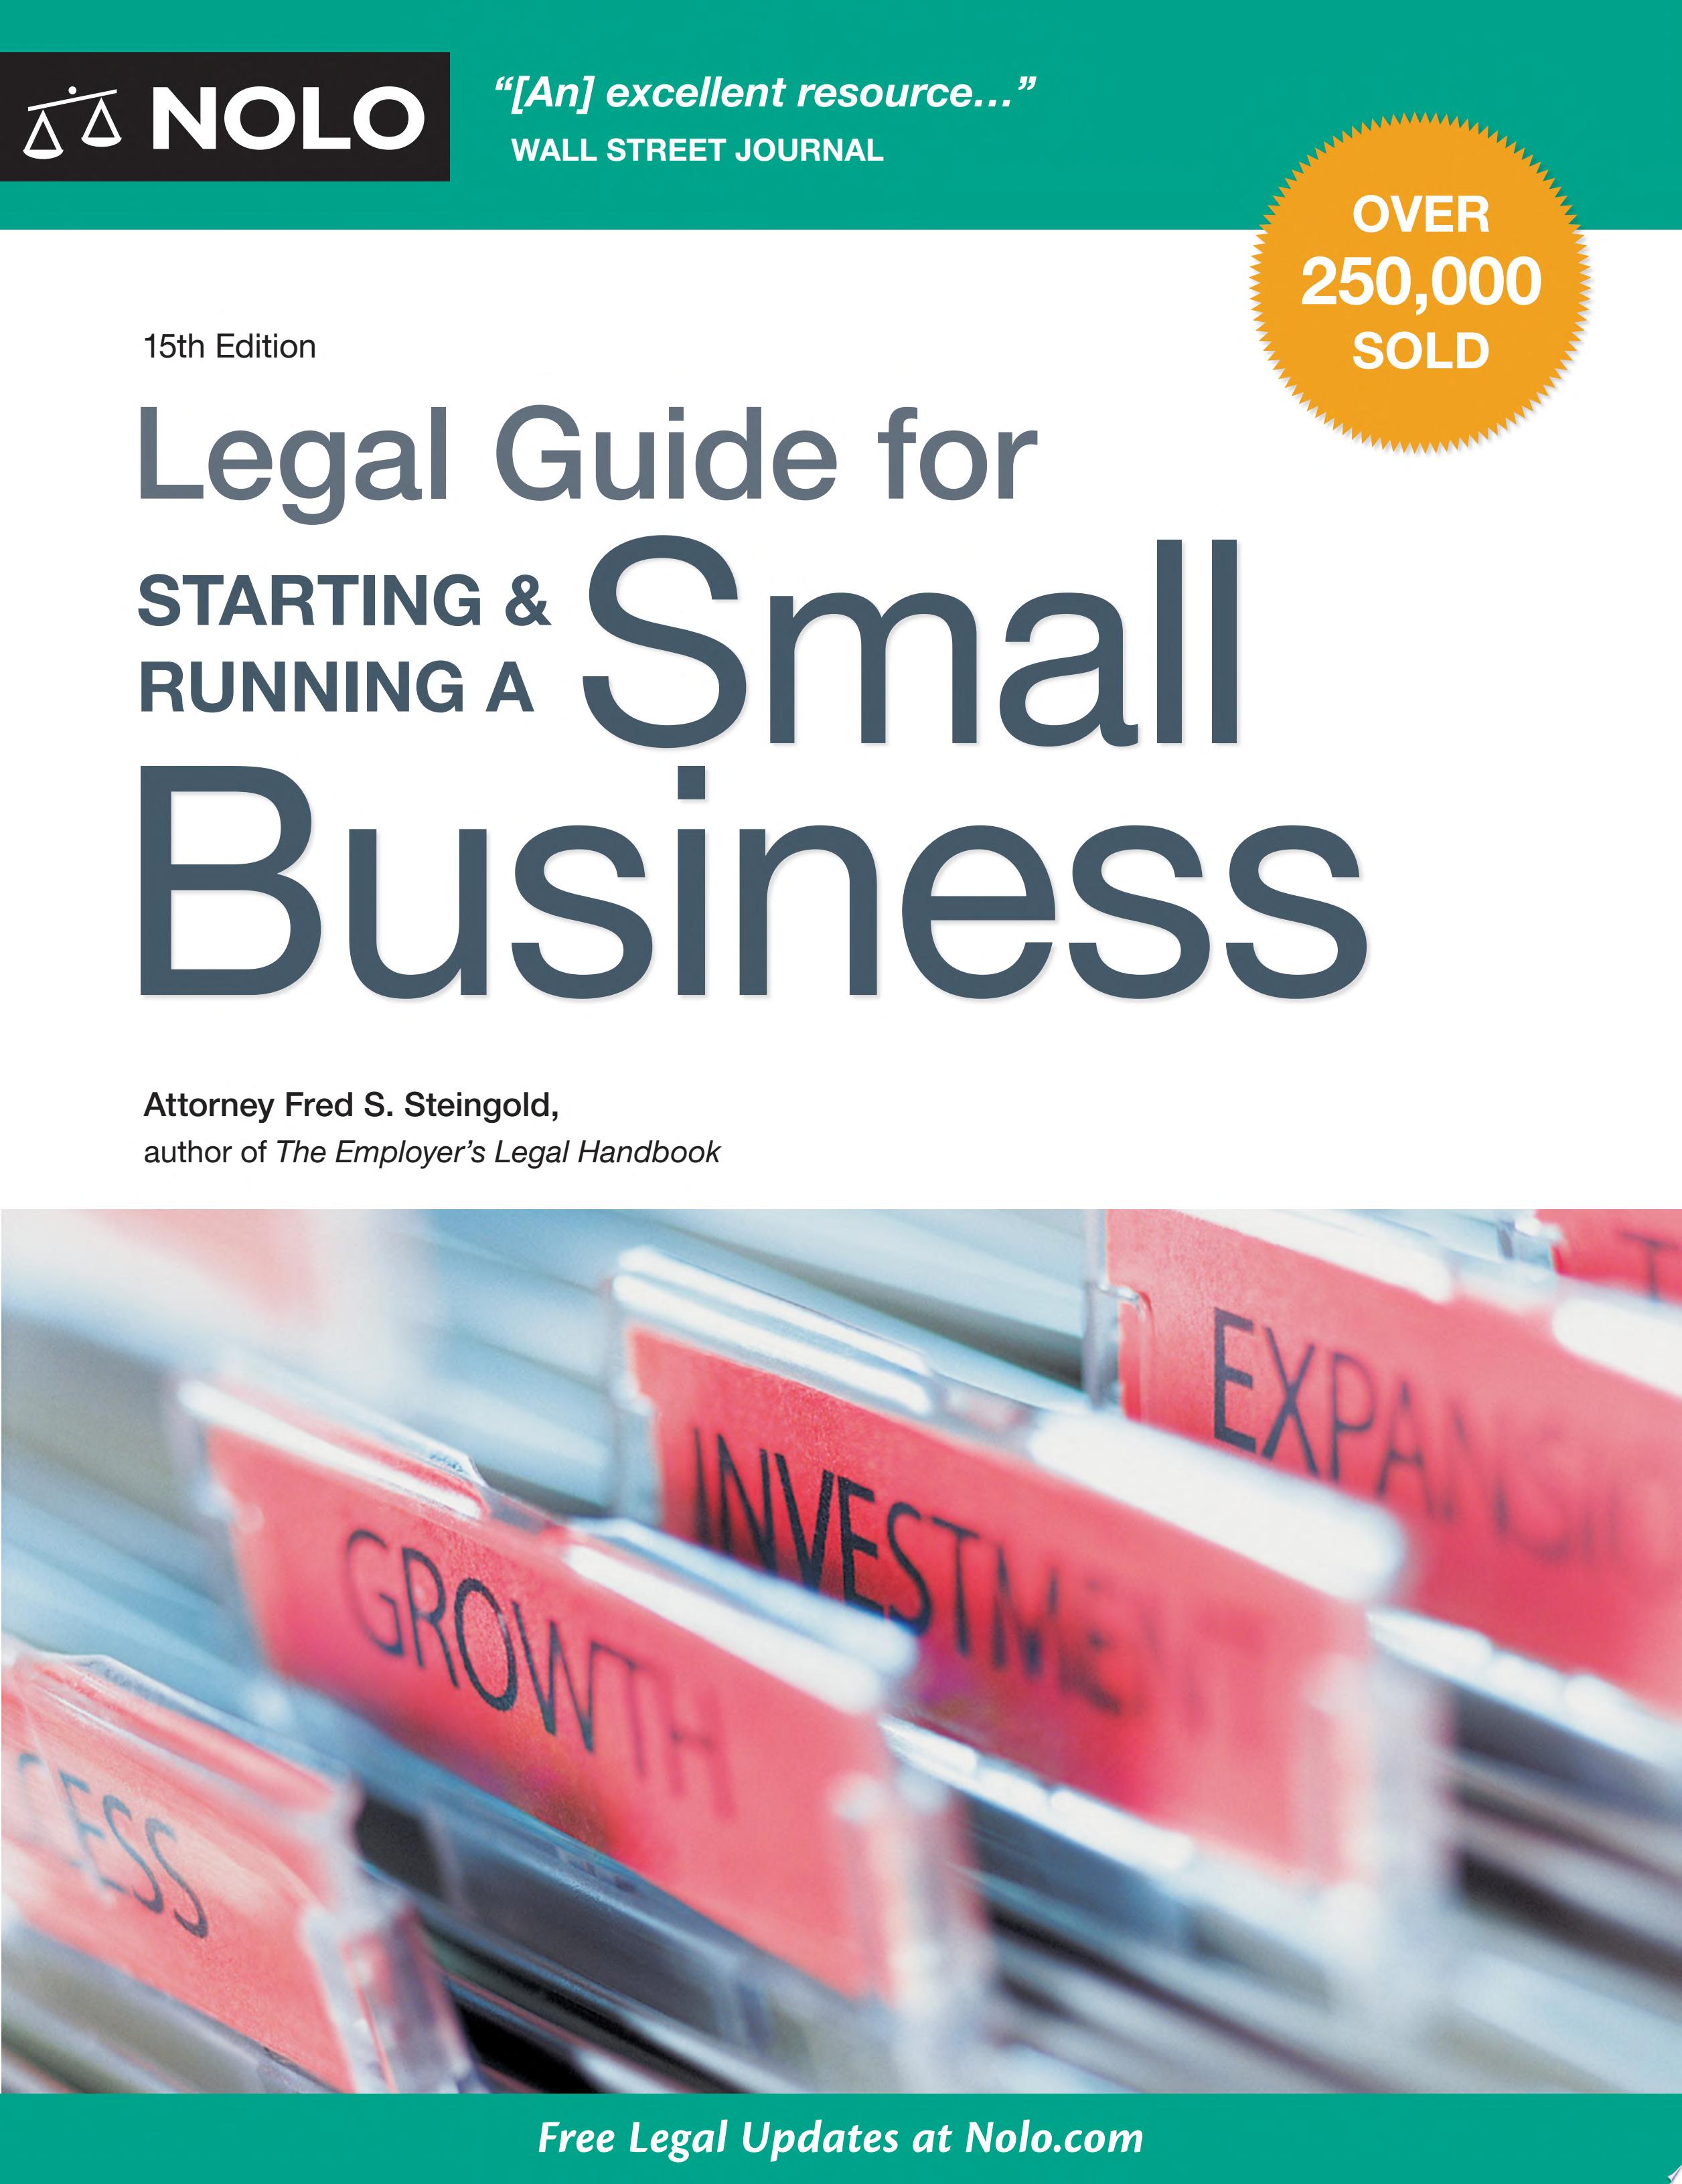 Image for "Legal Guide for Starting & Running a Small Business"